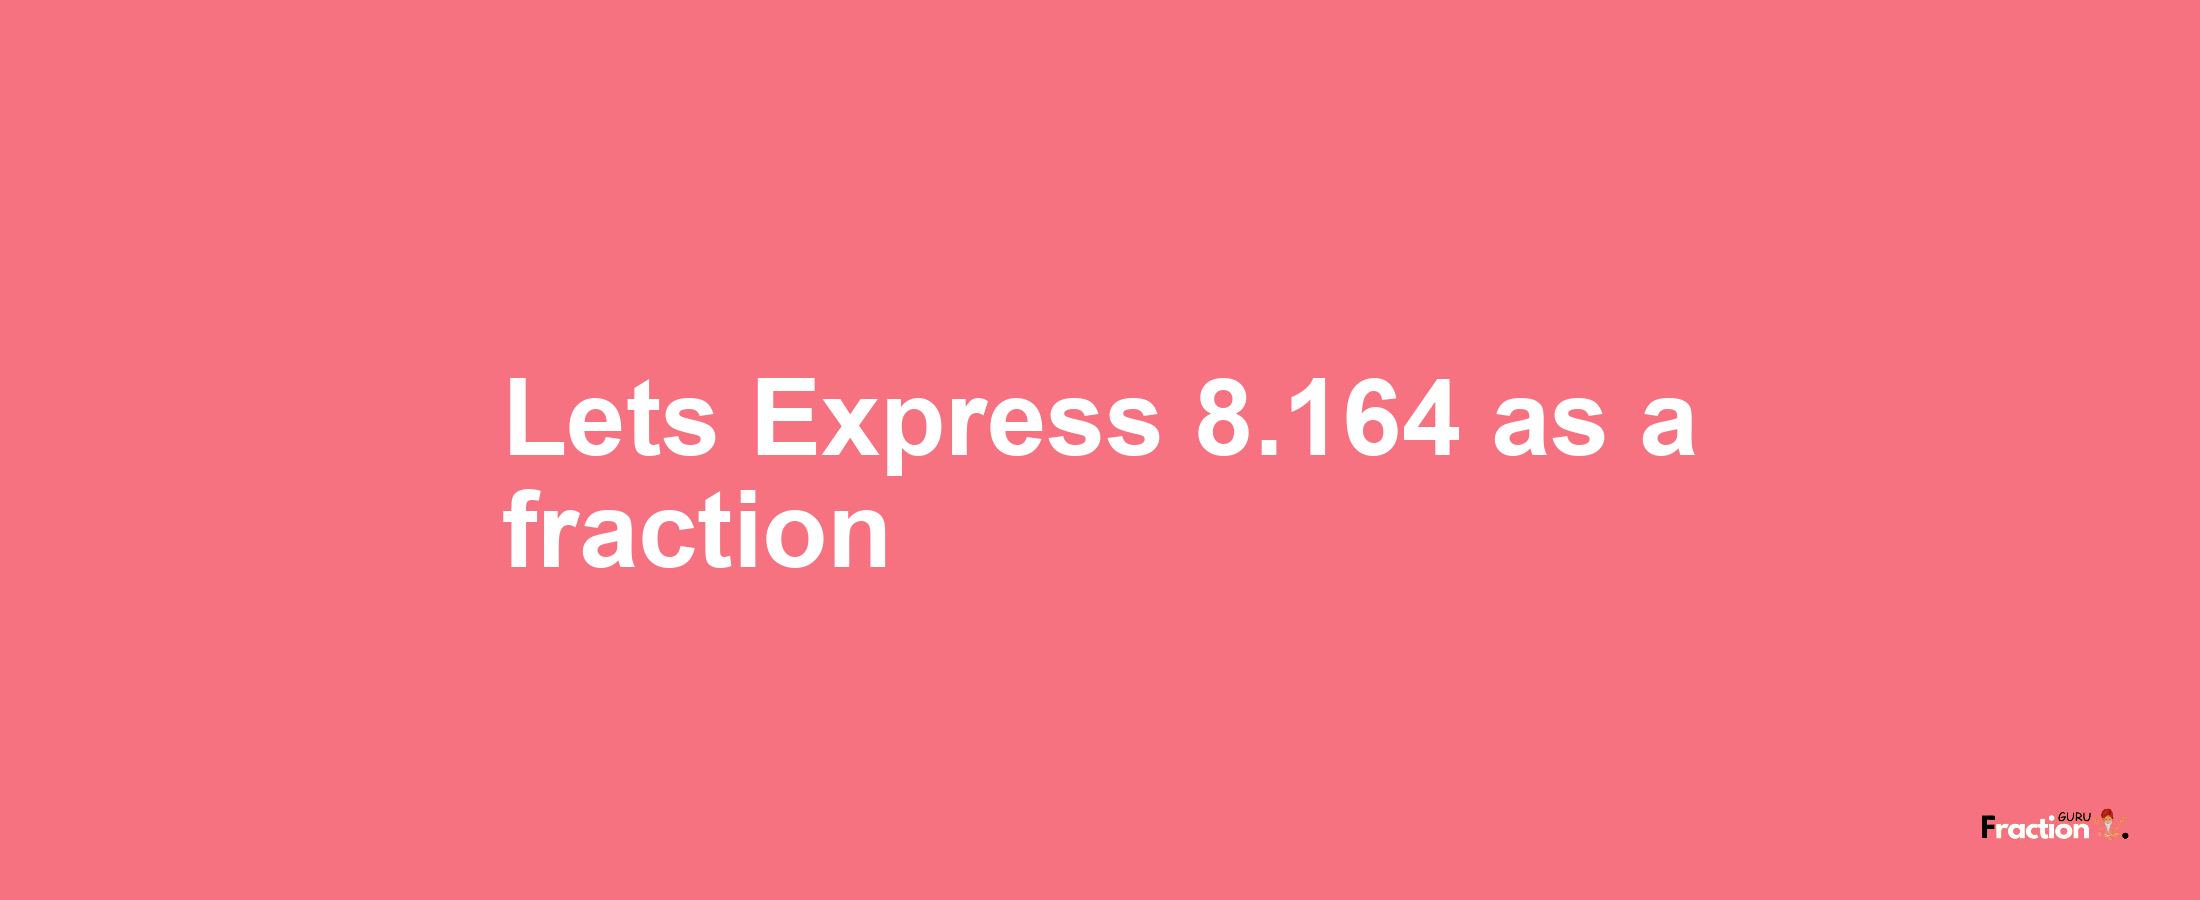 Lets Express 8.164 as afraction